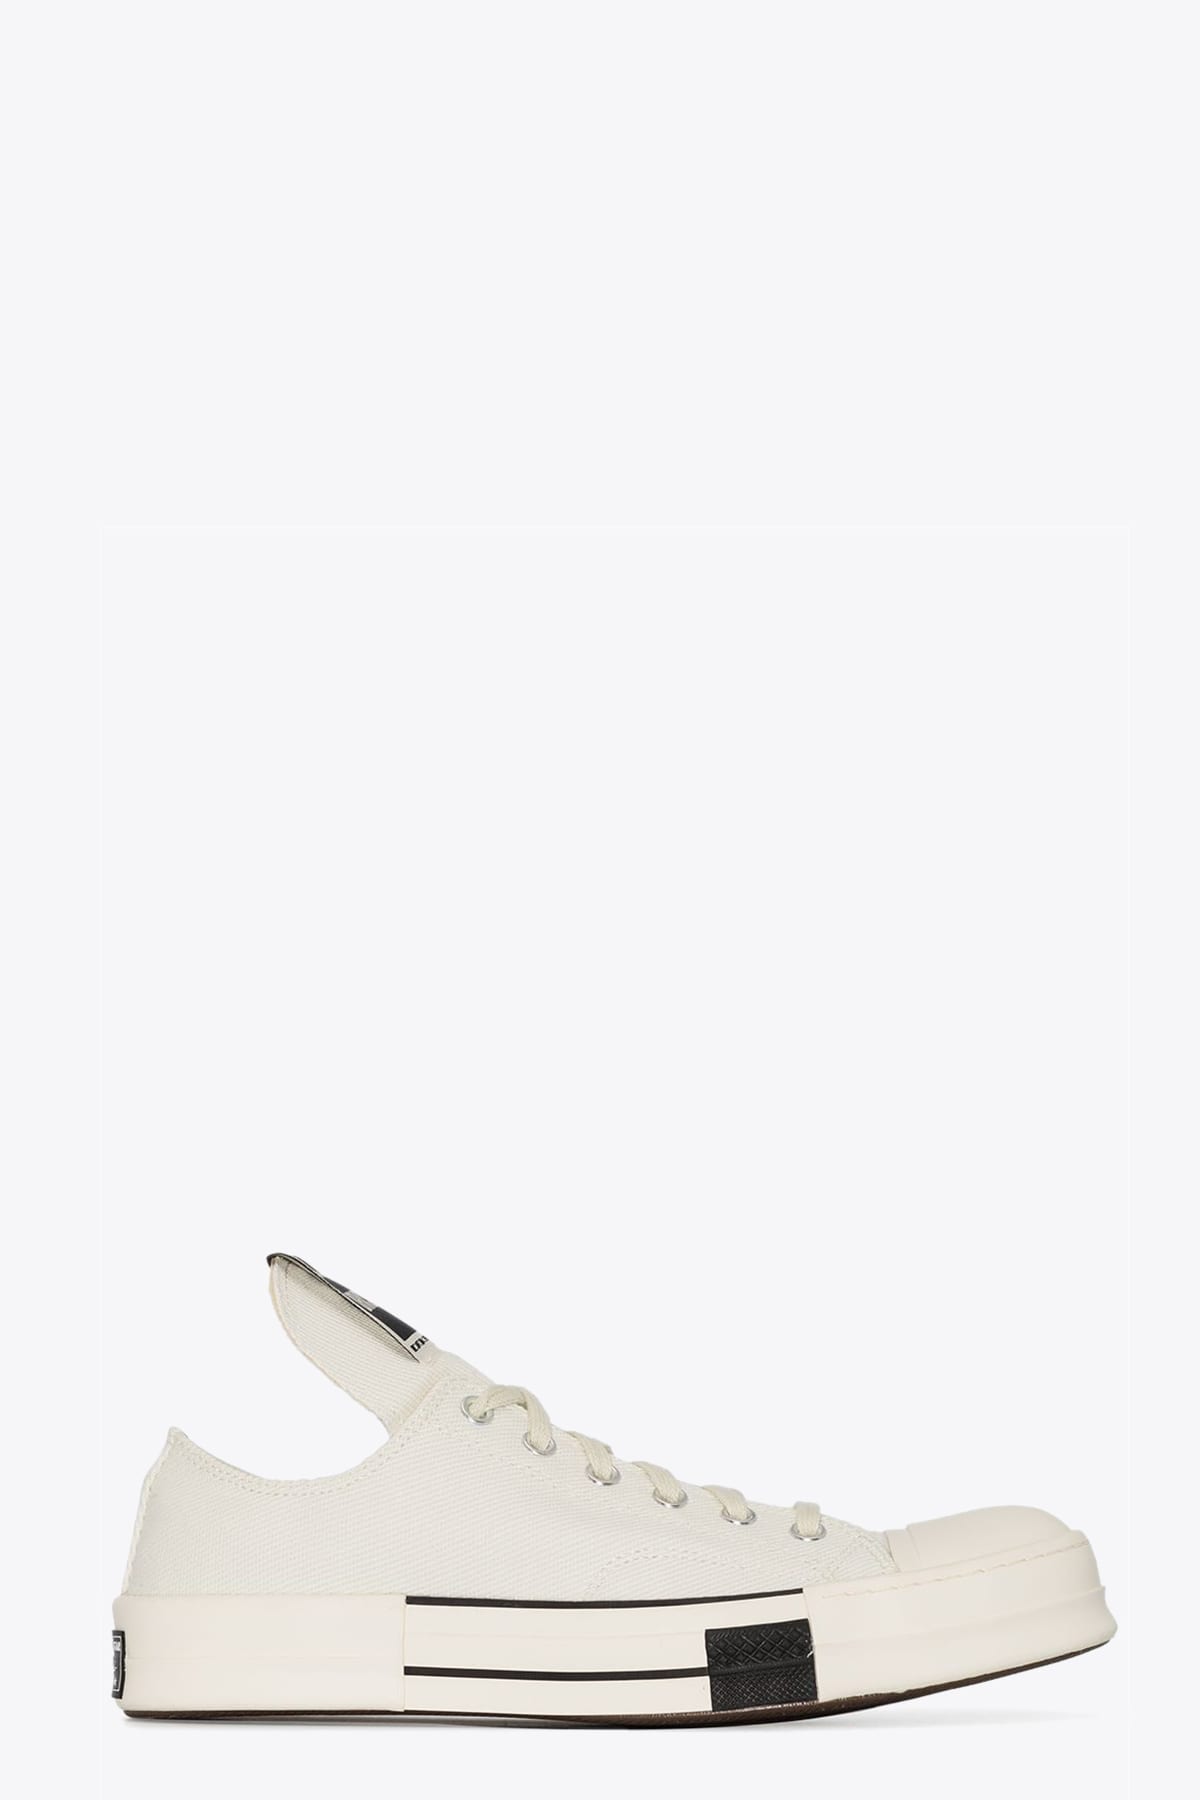 DRKSHDW Drkstar Ox 39727-ctd68u Low top off-white canvas sneaker in collaboration with Converse - Drkstr OX